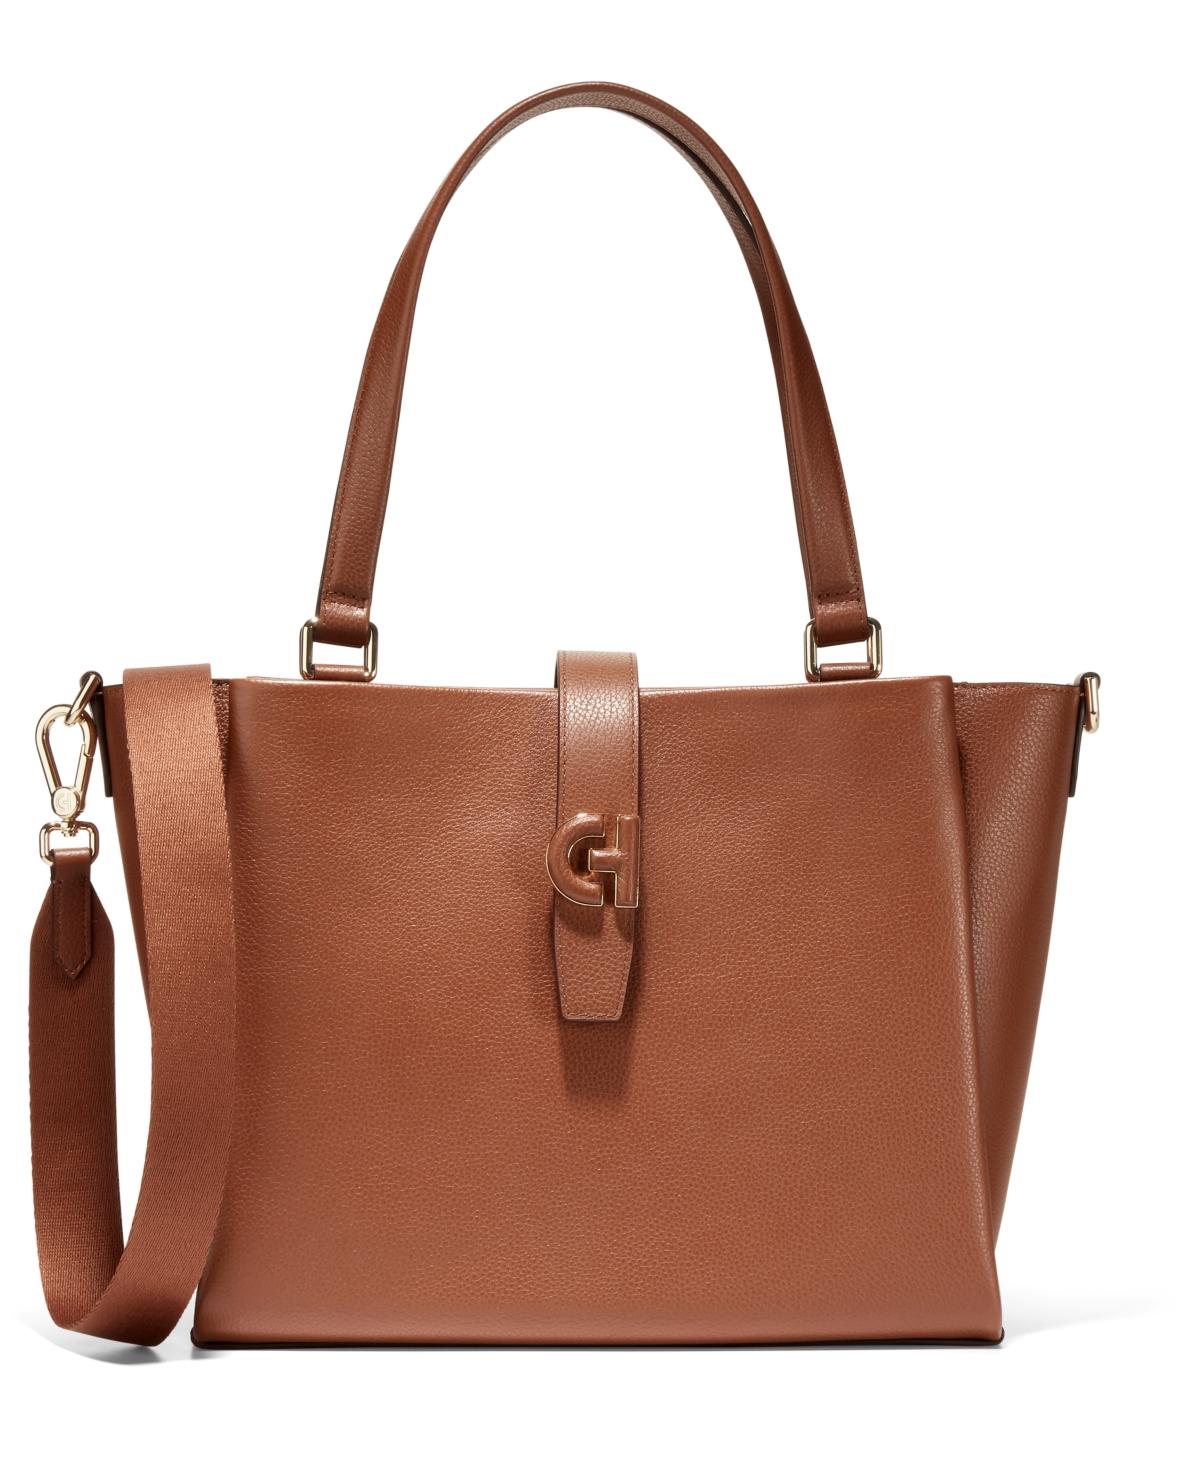 Essential Leather Tote